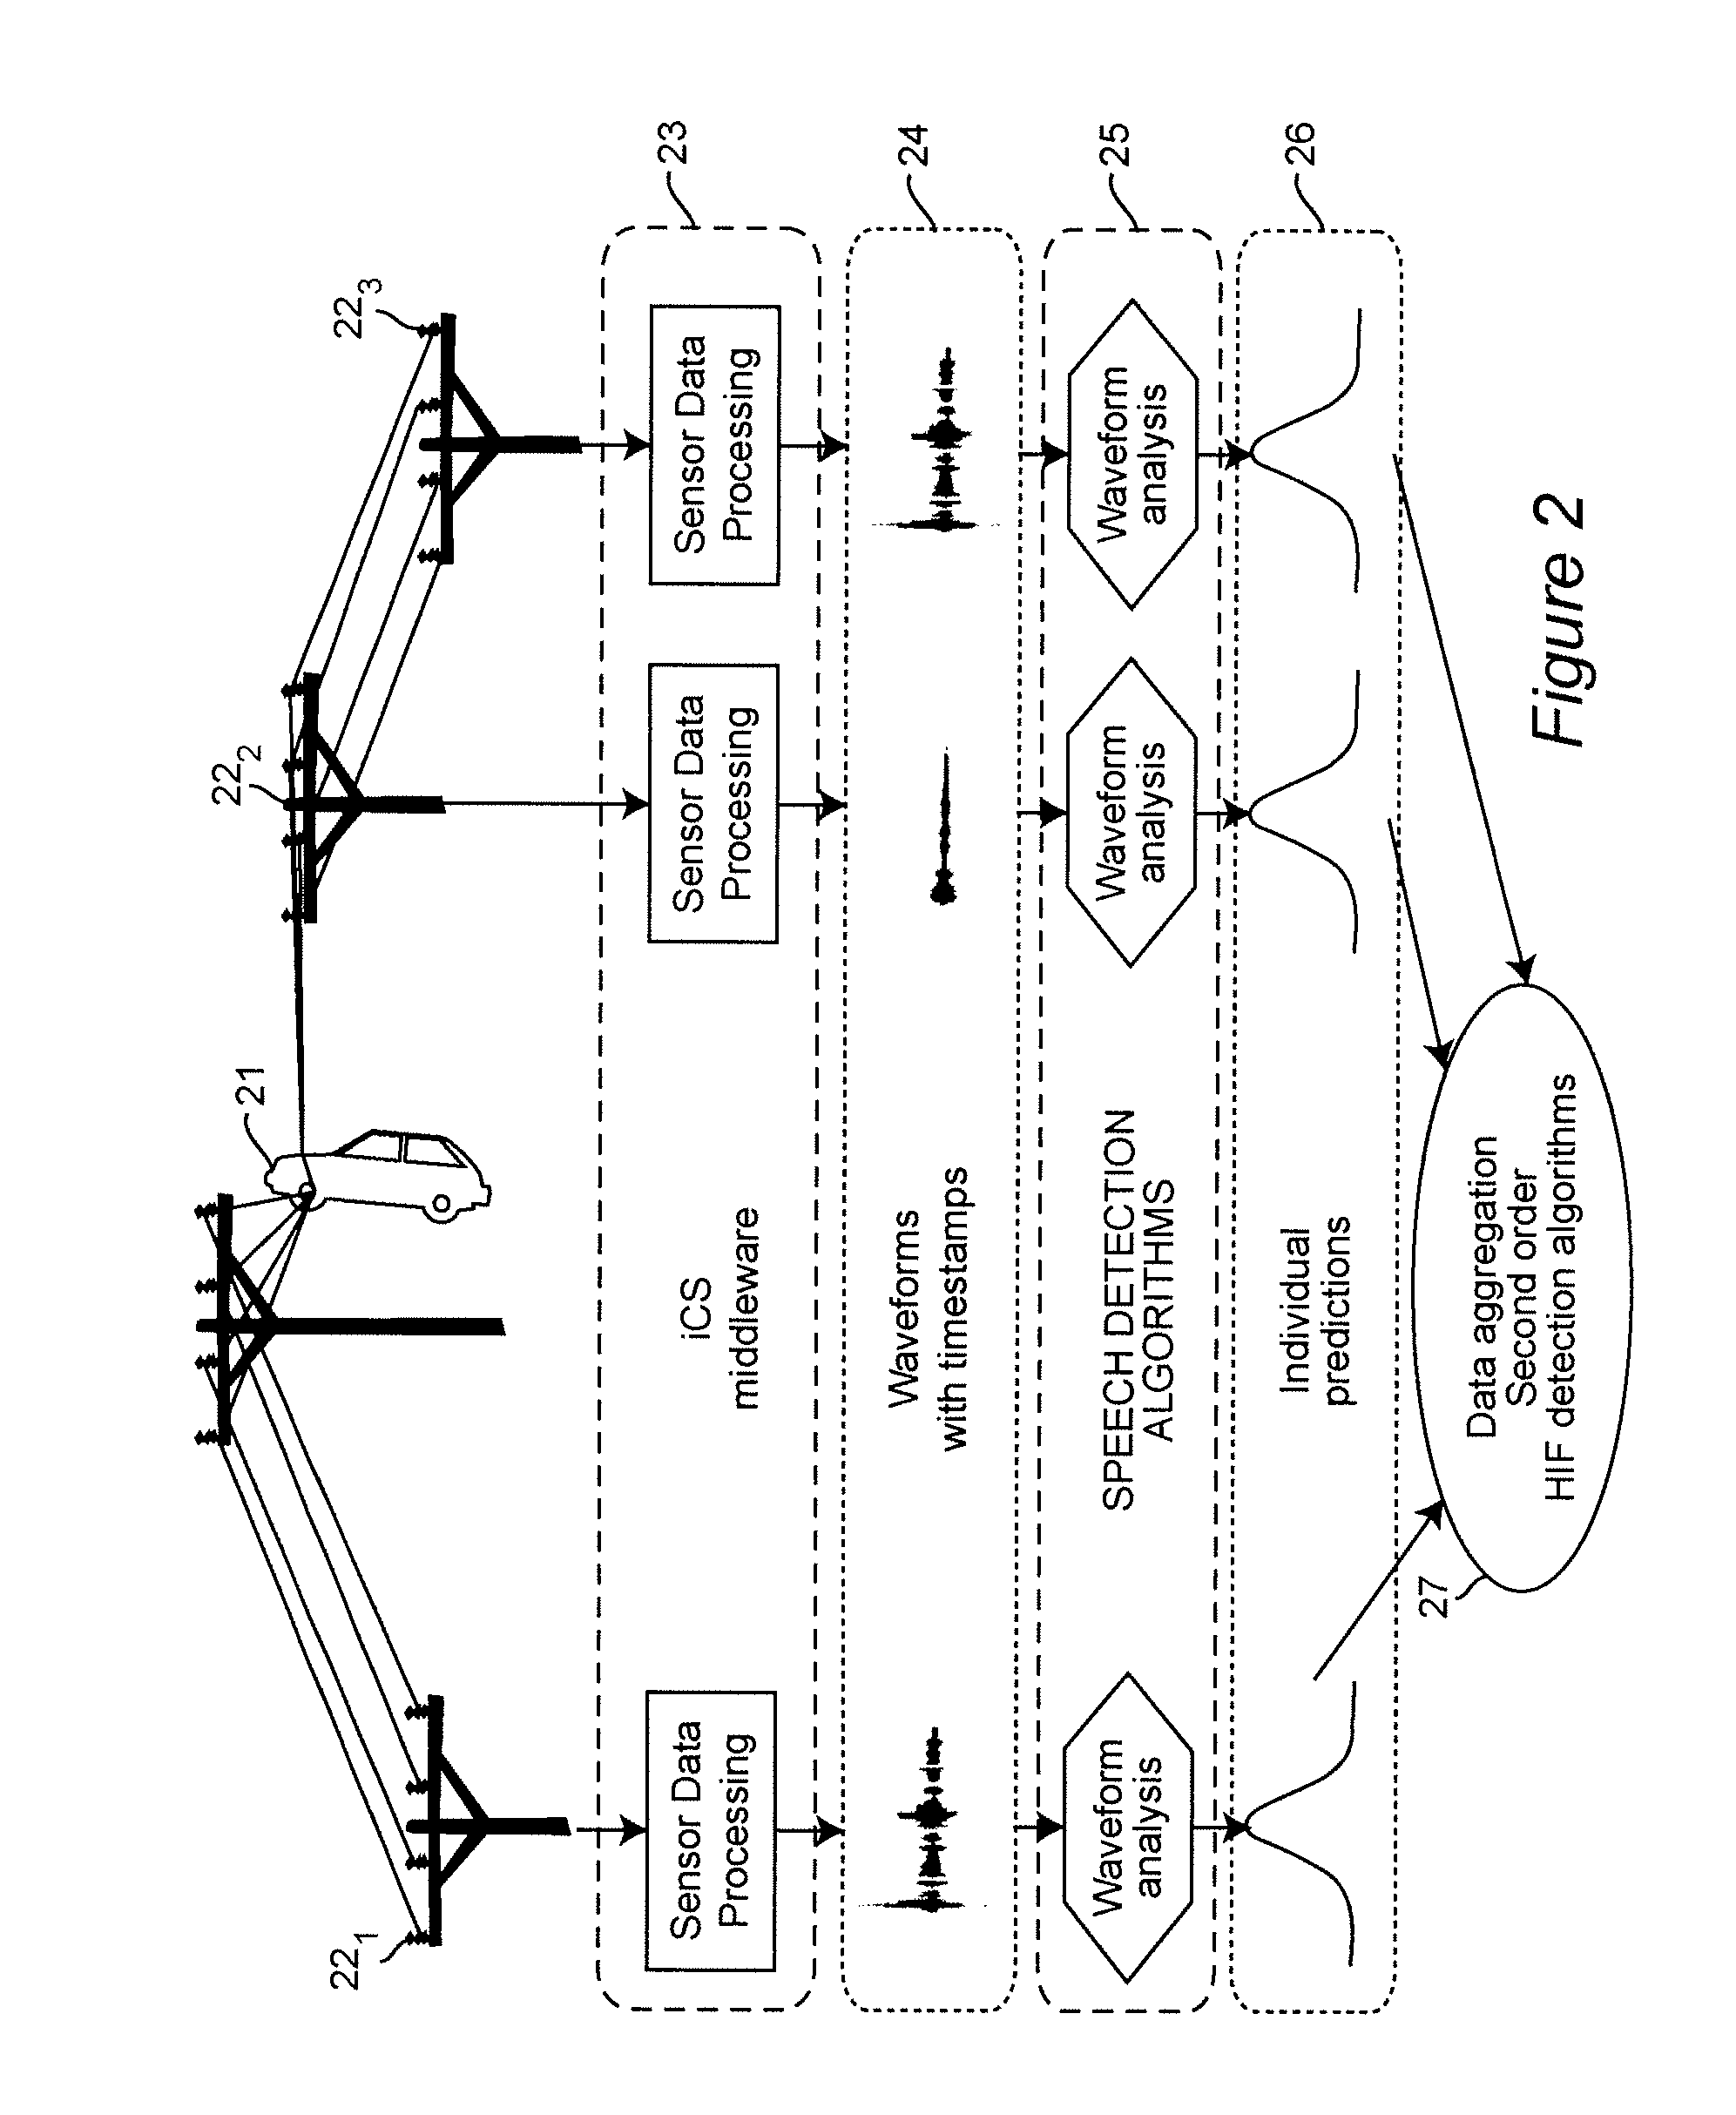 Application of Speech and Speaker Recognition Tools to Fault Detection in Electrical Circuits